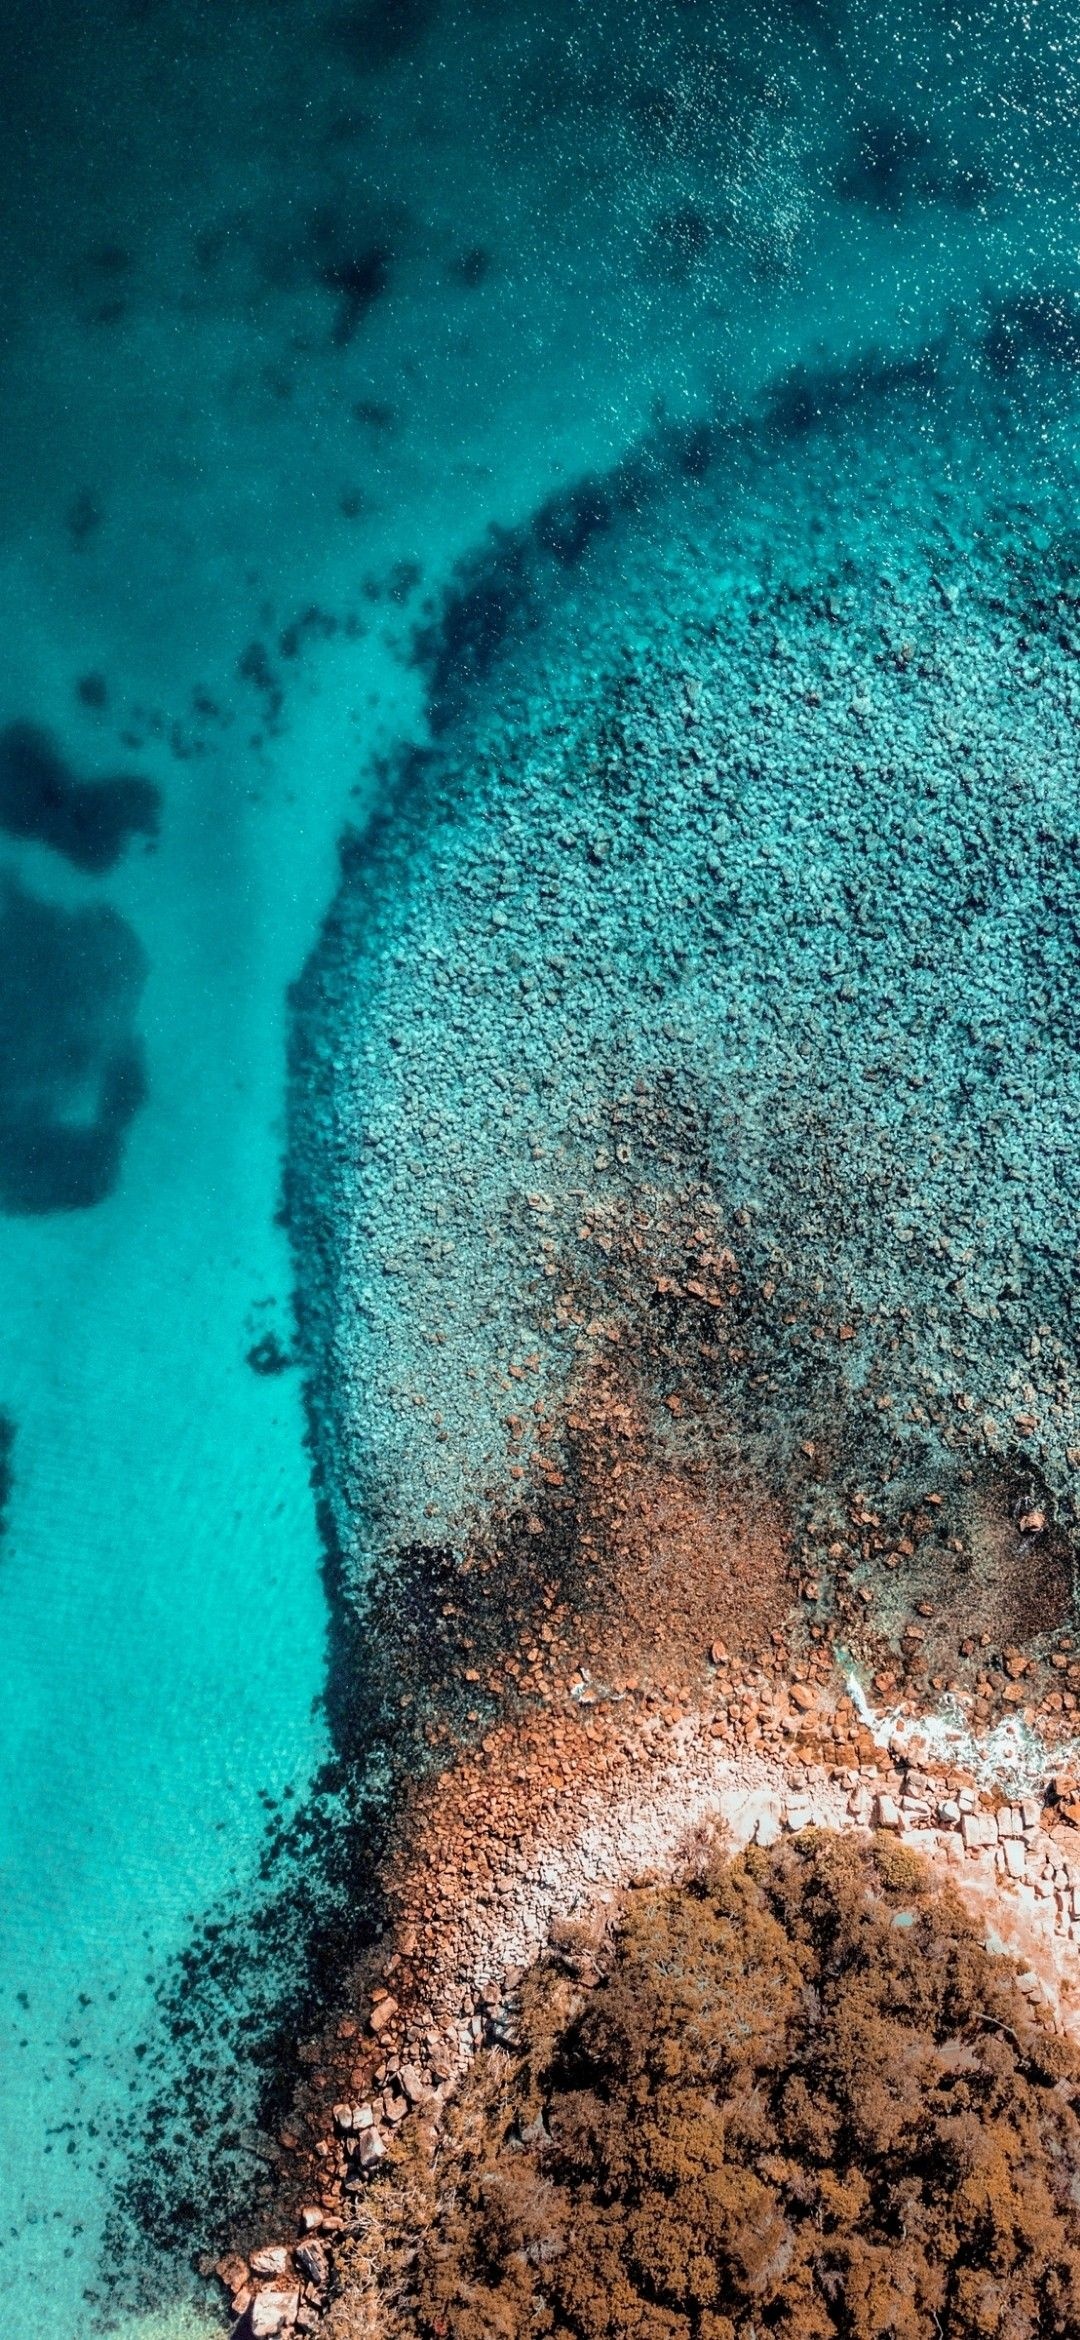 Ocean-inspired wallpaper, Phone aesthetics, Cool artistic design, Tranquil imagery, 1080x2340 HD Phone